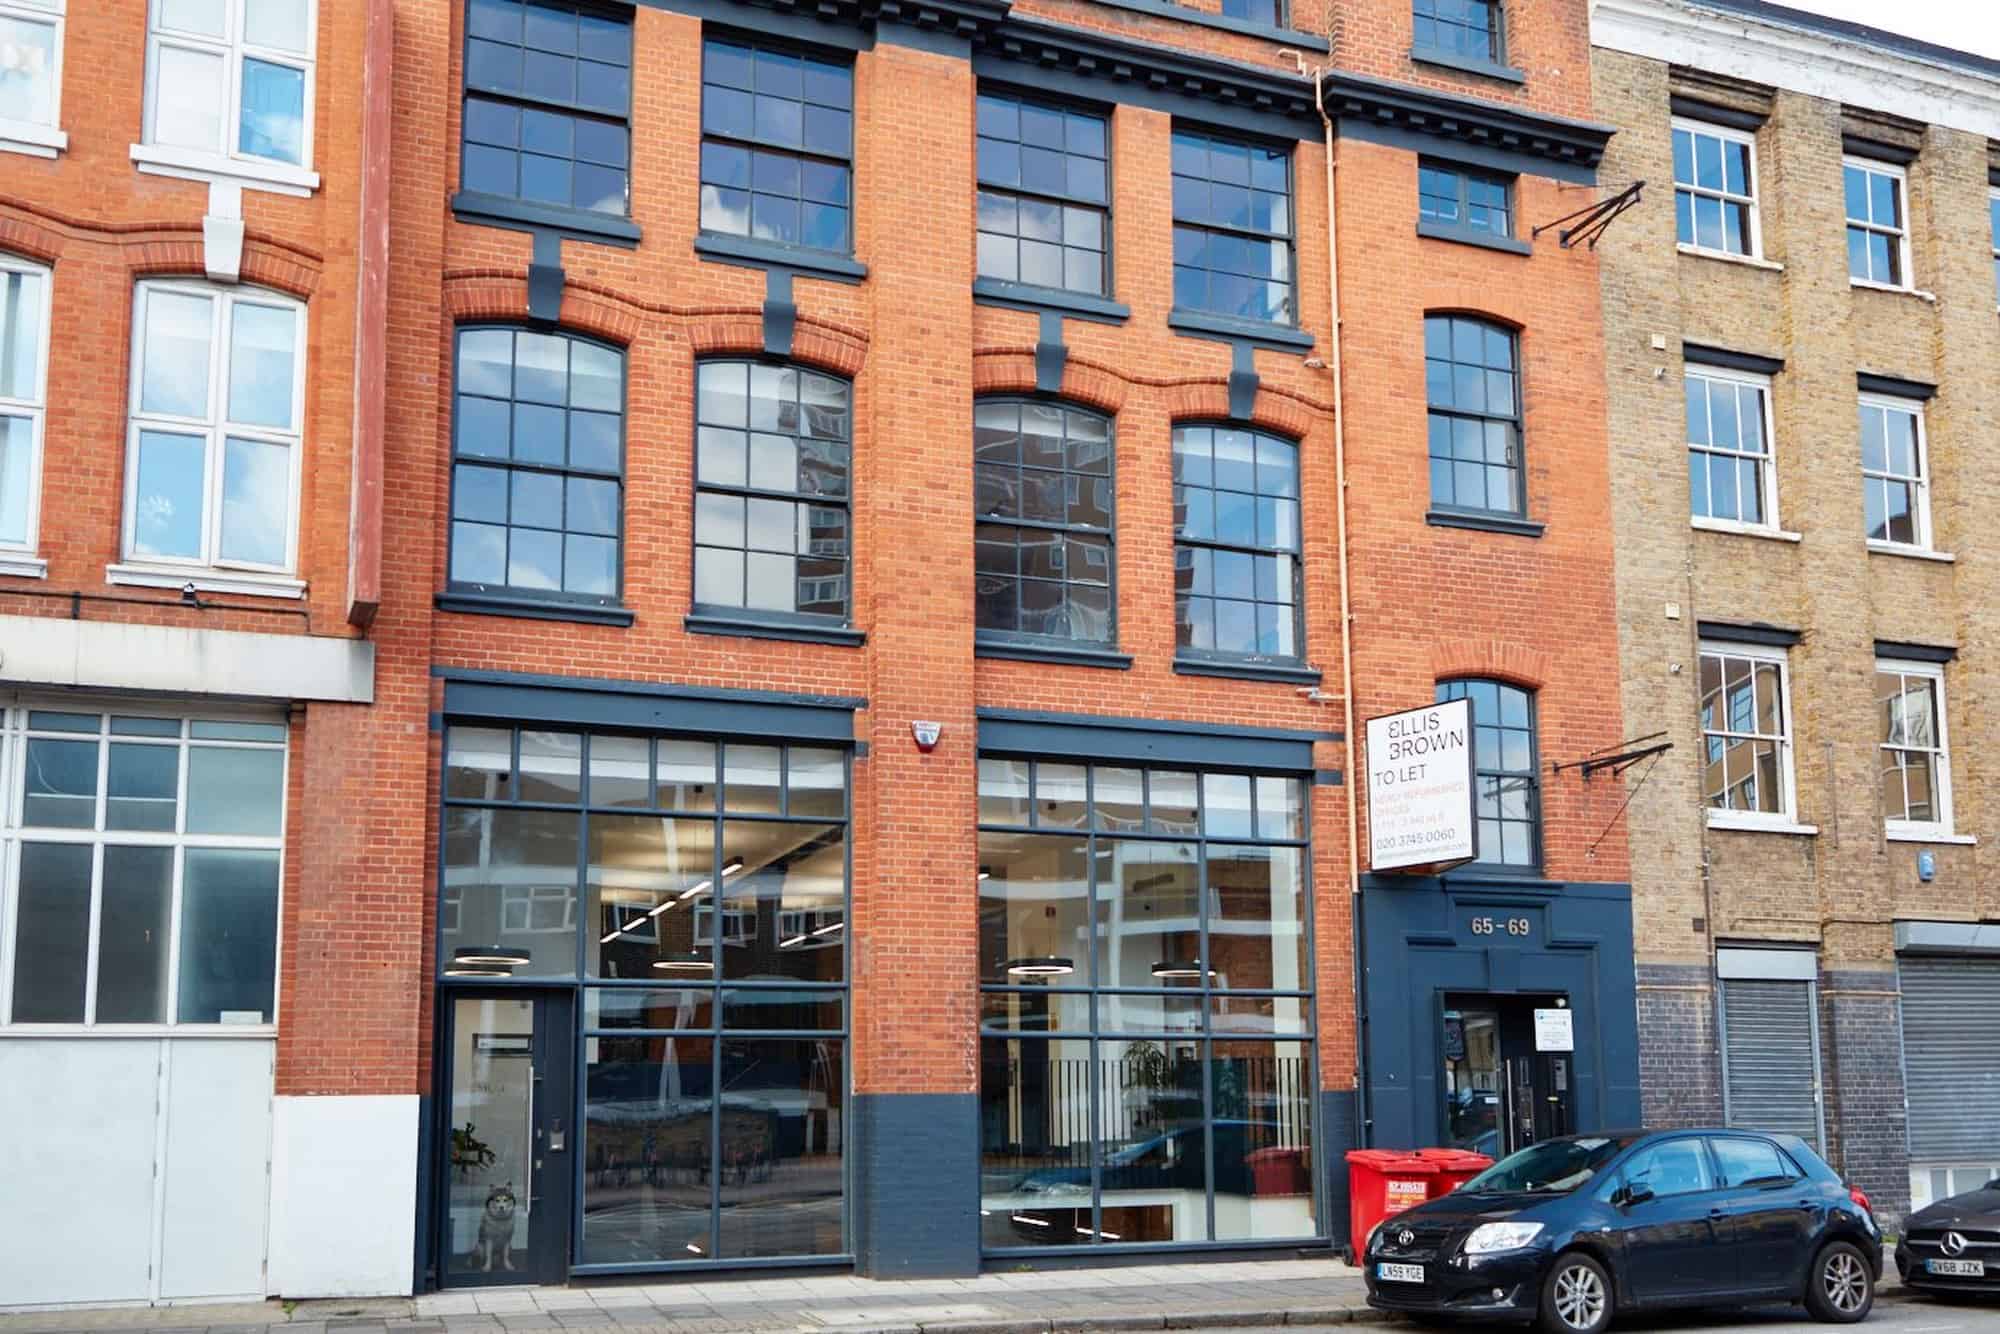 Brooklyn N1 - A New York Loft style apartment studio with wheelchair friendly access and outdoor terrace. Available for both small and larger scale productions - The Location Guys